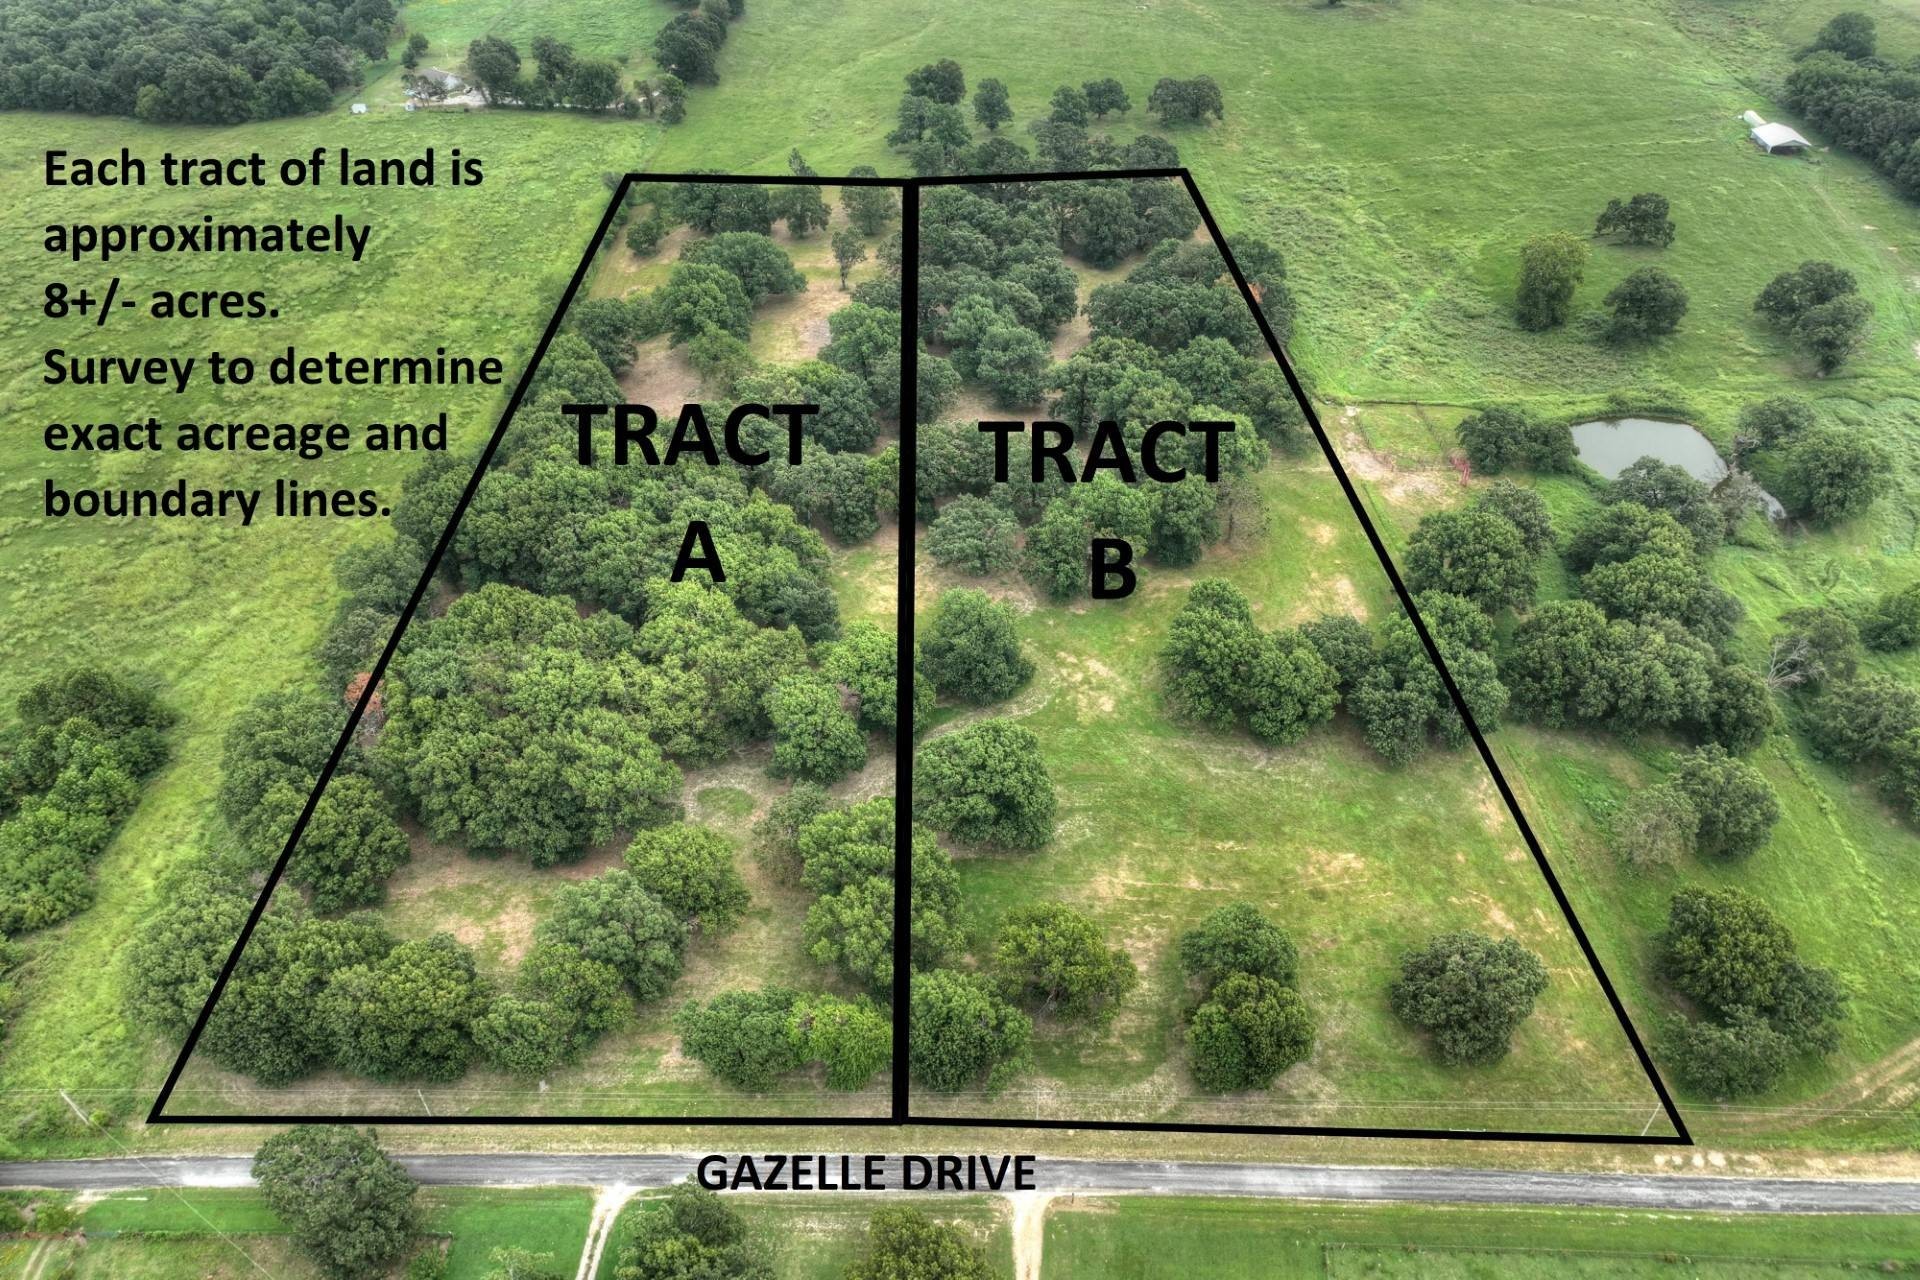 1. Xxx Tract A On Gazelle Drive (Approx. 8 Acres)